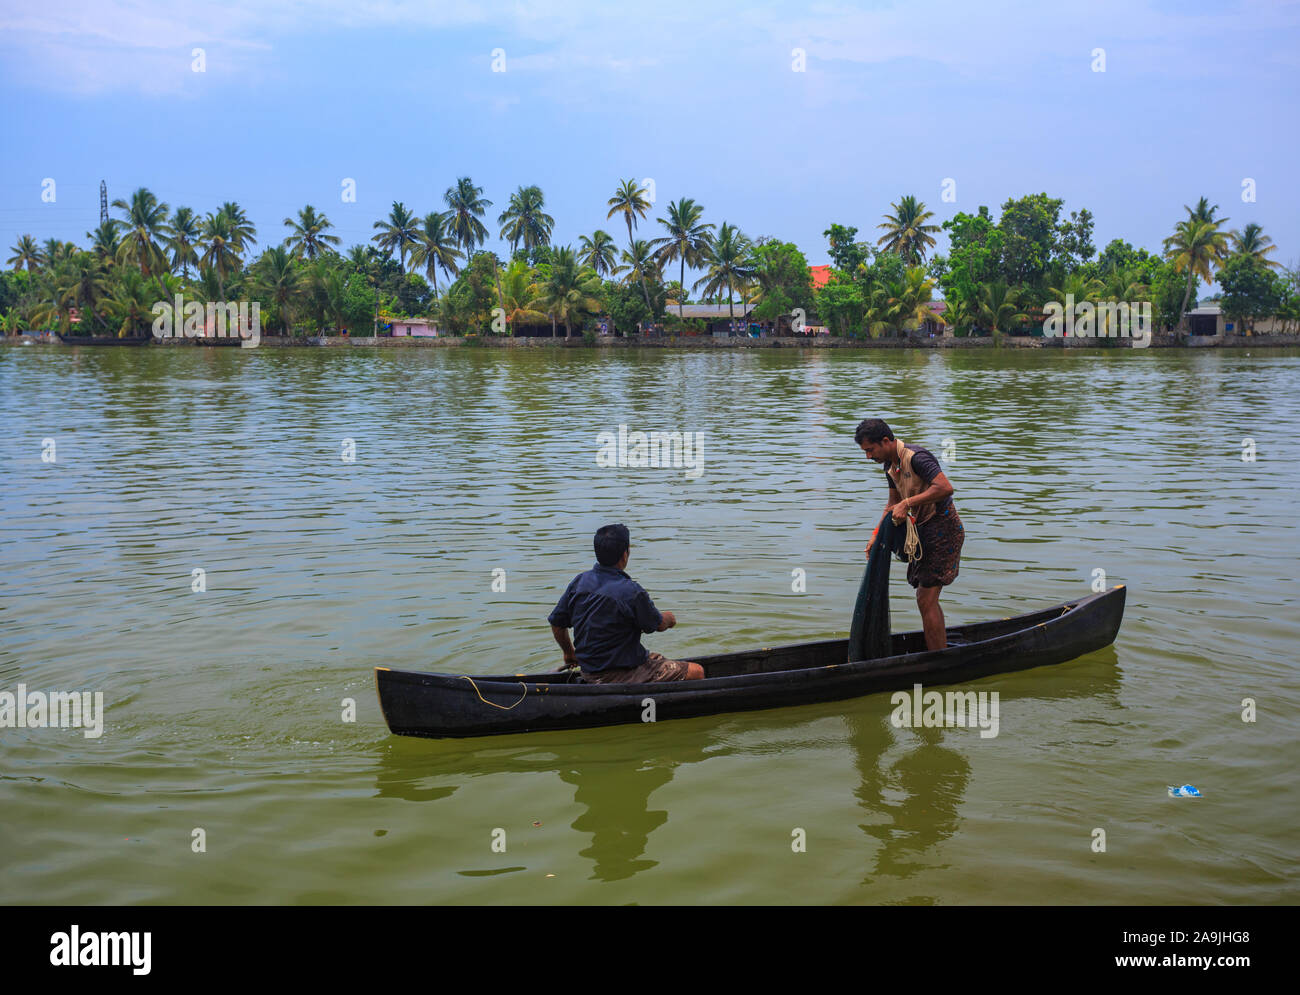 Two fishermen fishing from a wooden canoe in Alleppey backwaters (Kerala, India) Stock Photo